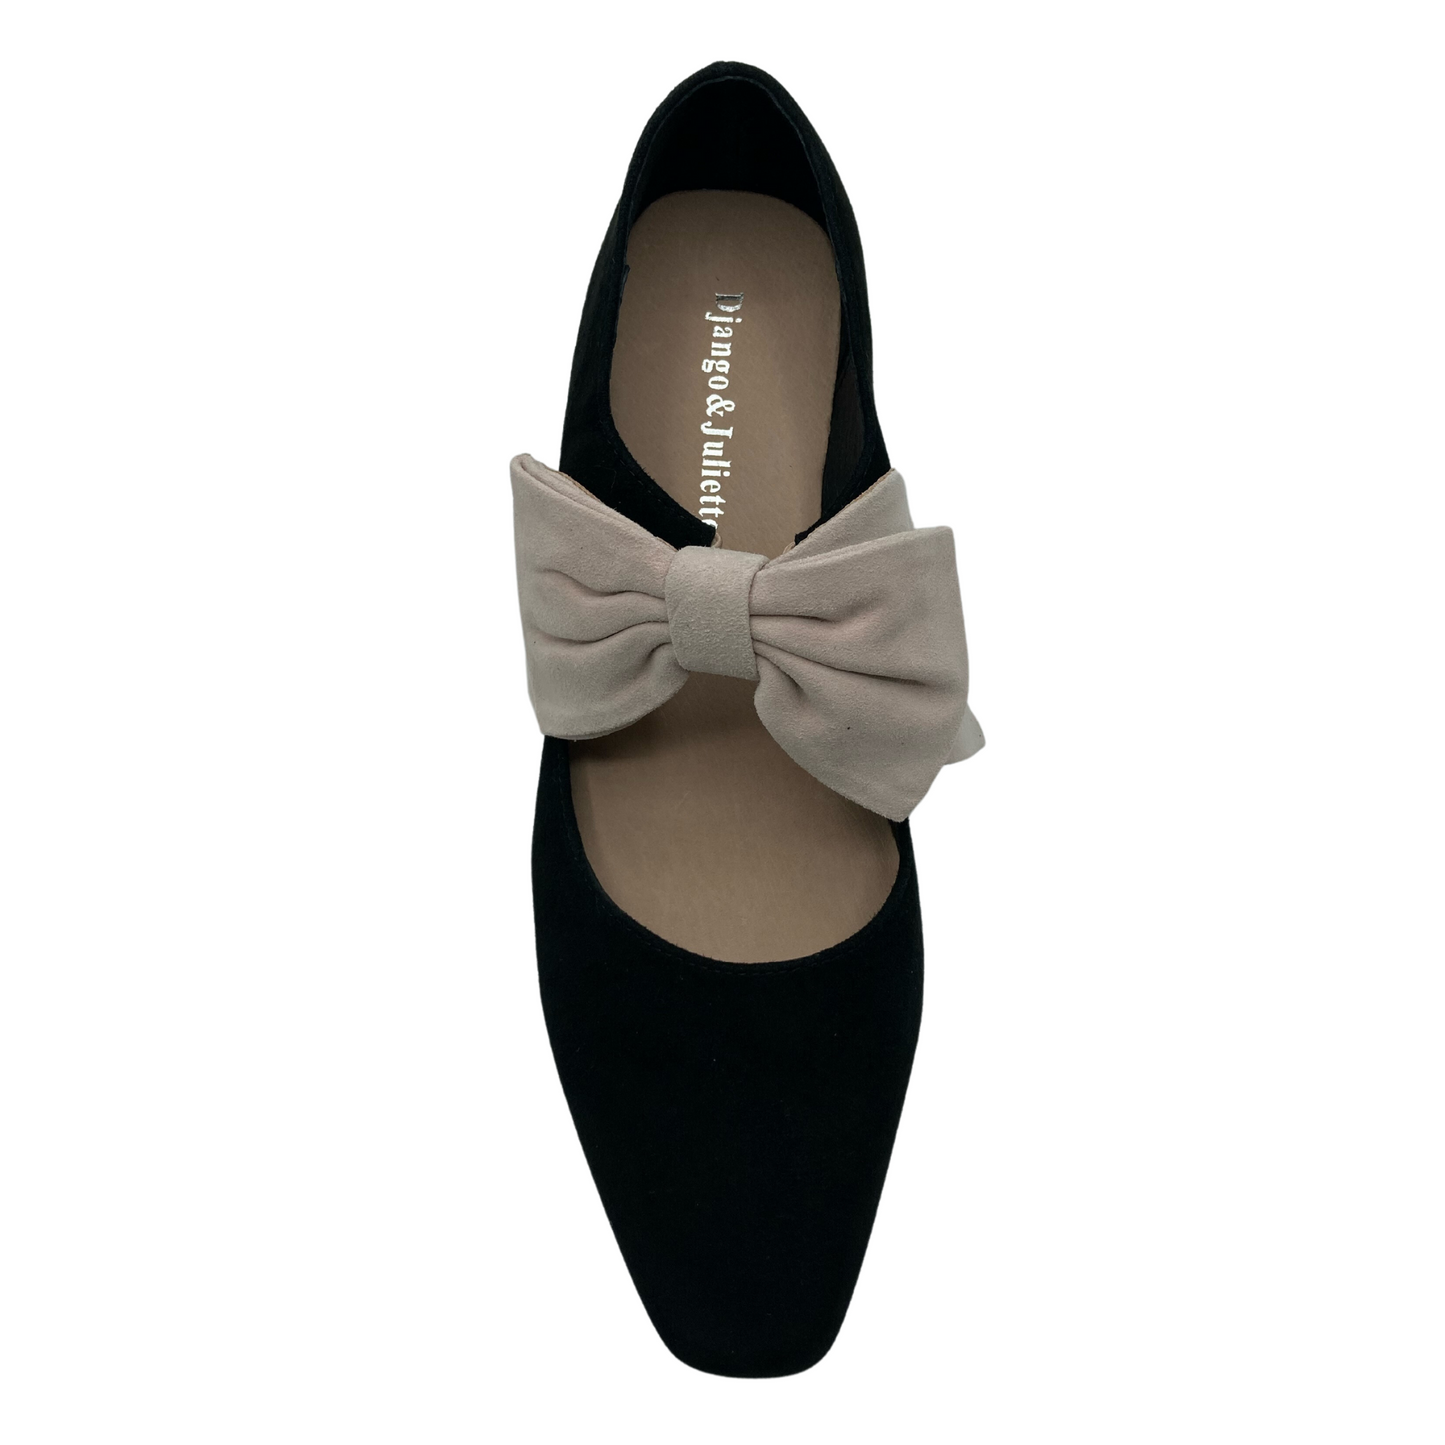 Top view of mary jane shoe with slight pointed toe and bow detail